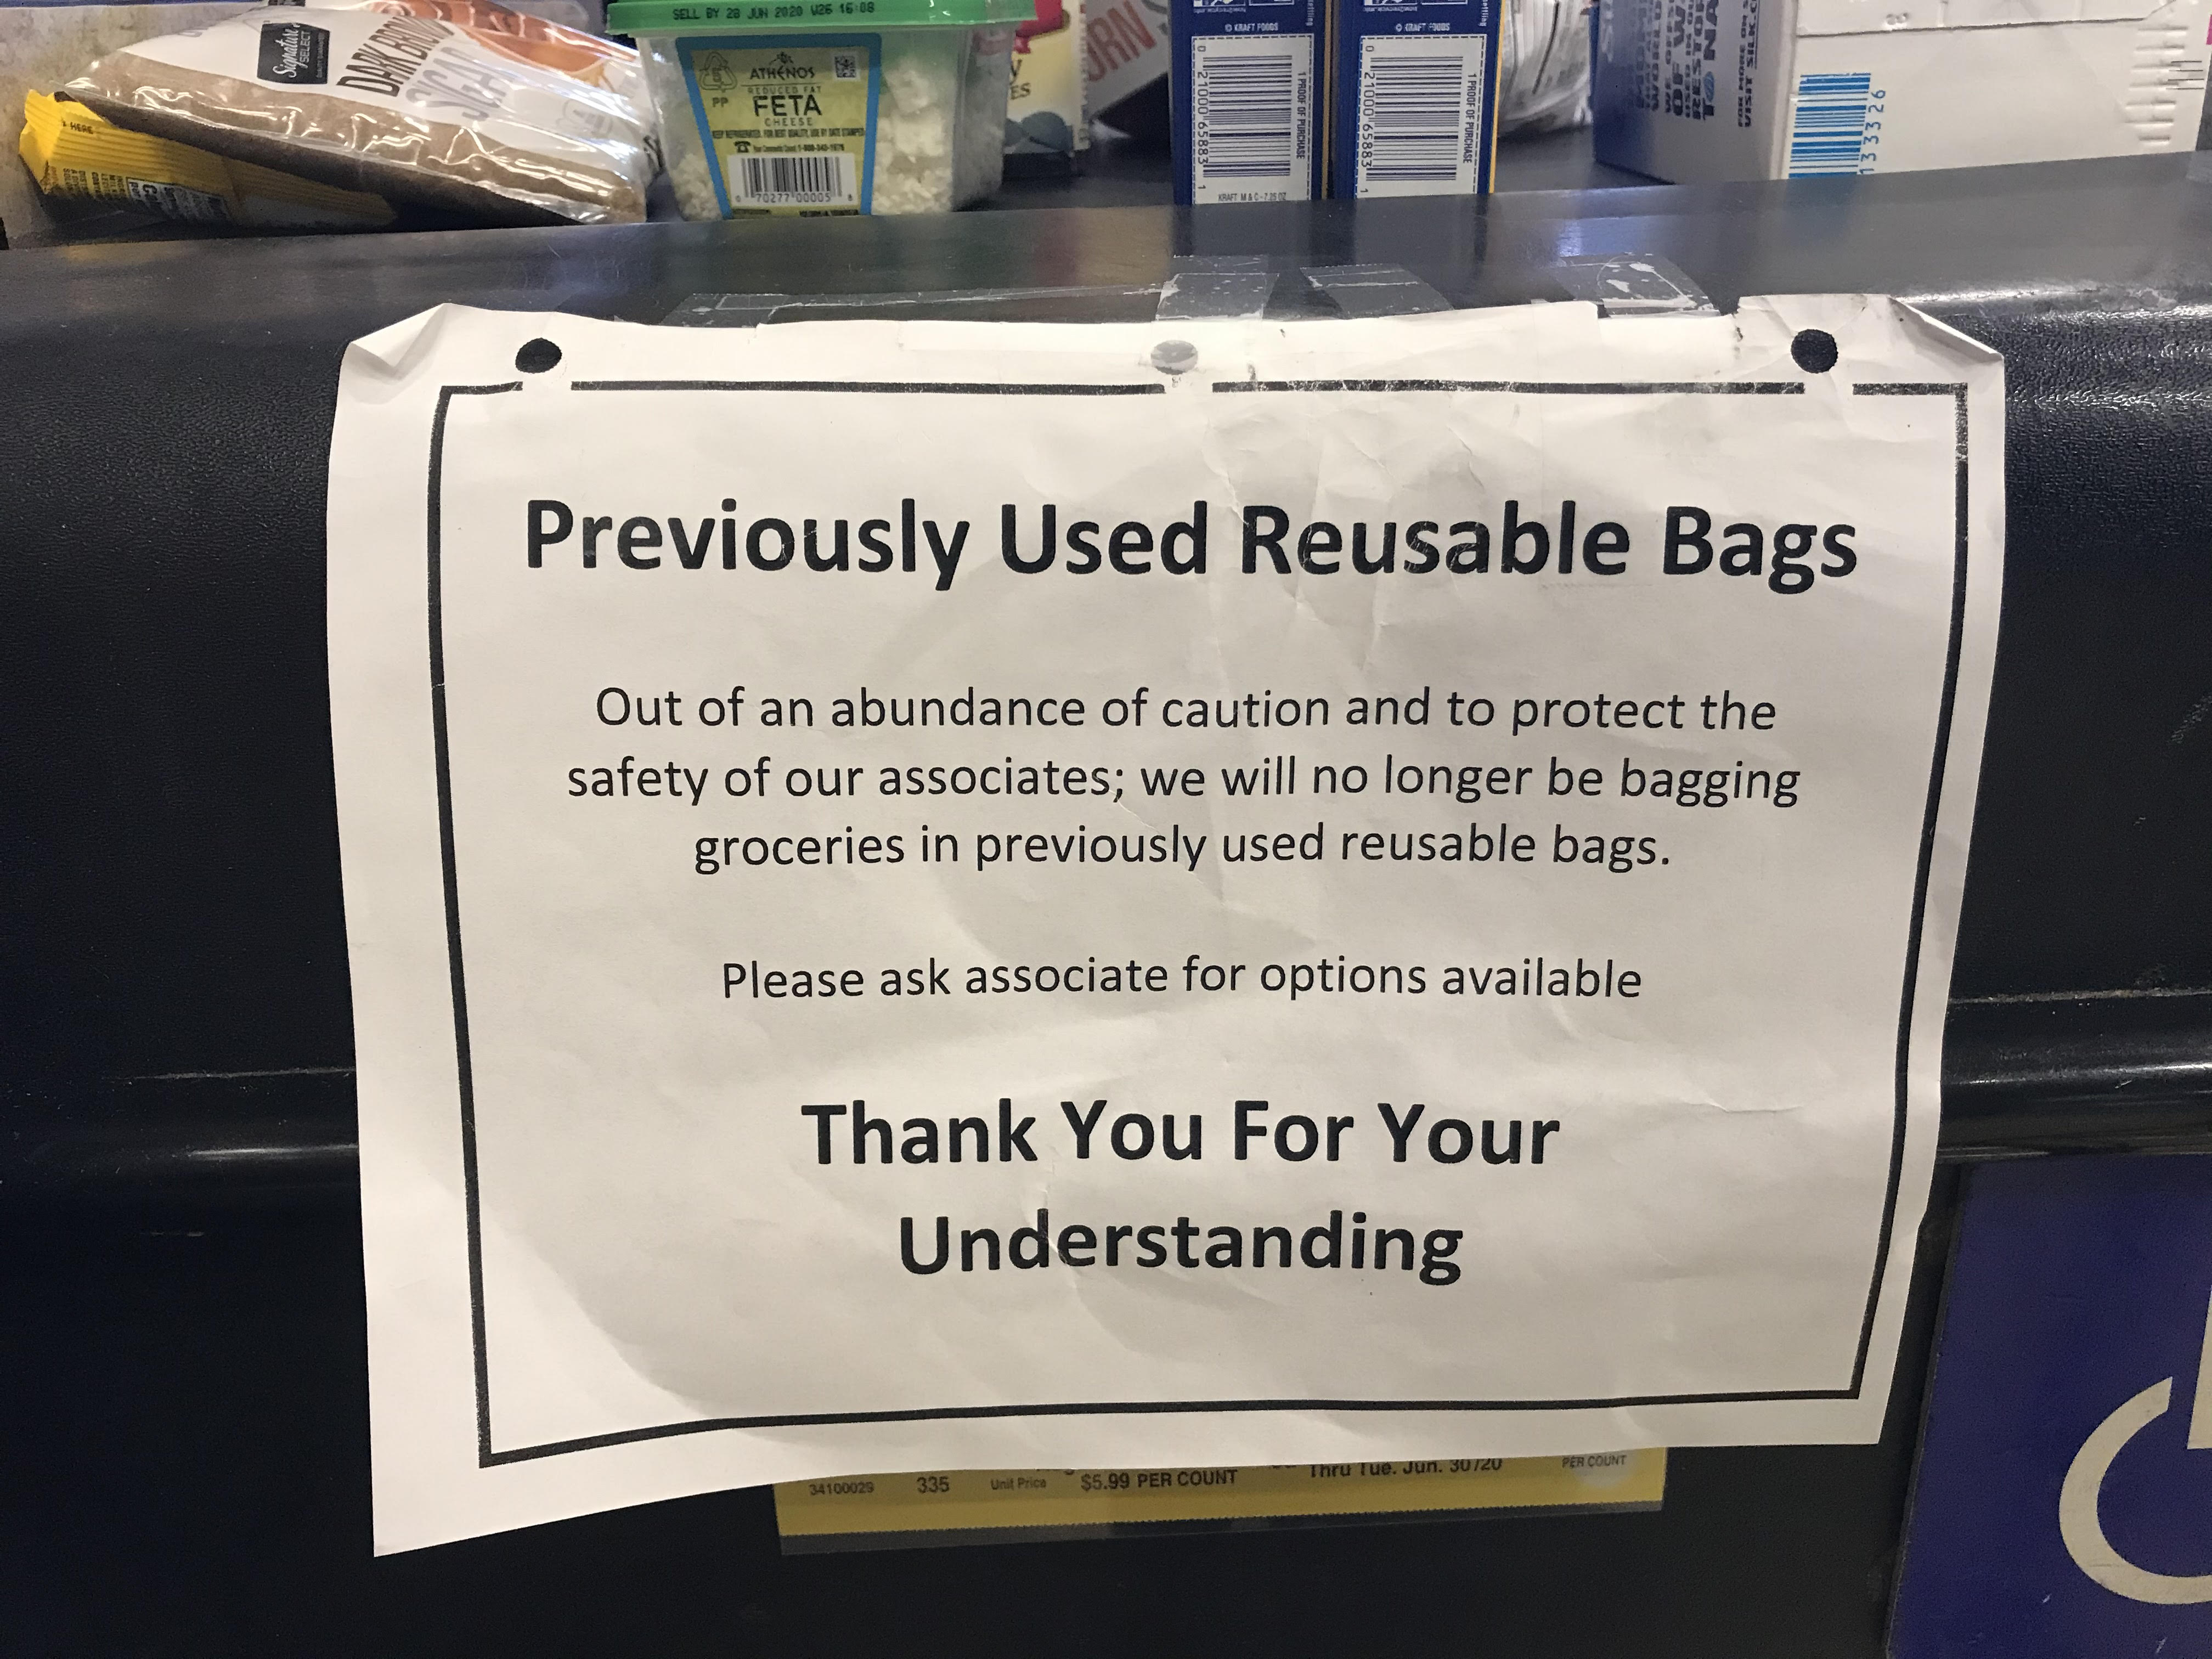 Clear Bag Policy - University of Nevada Athletics